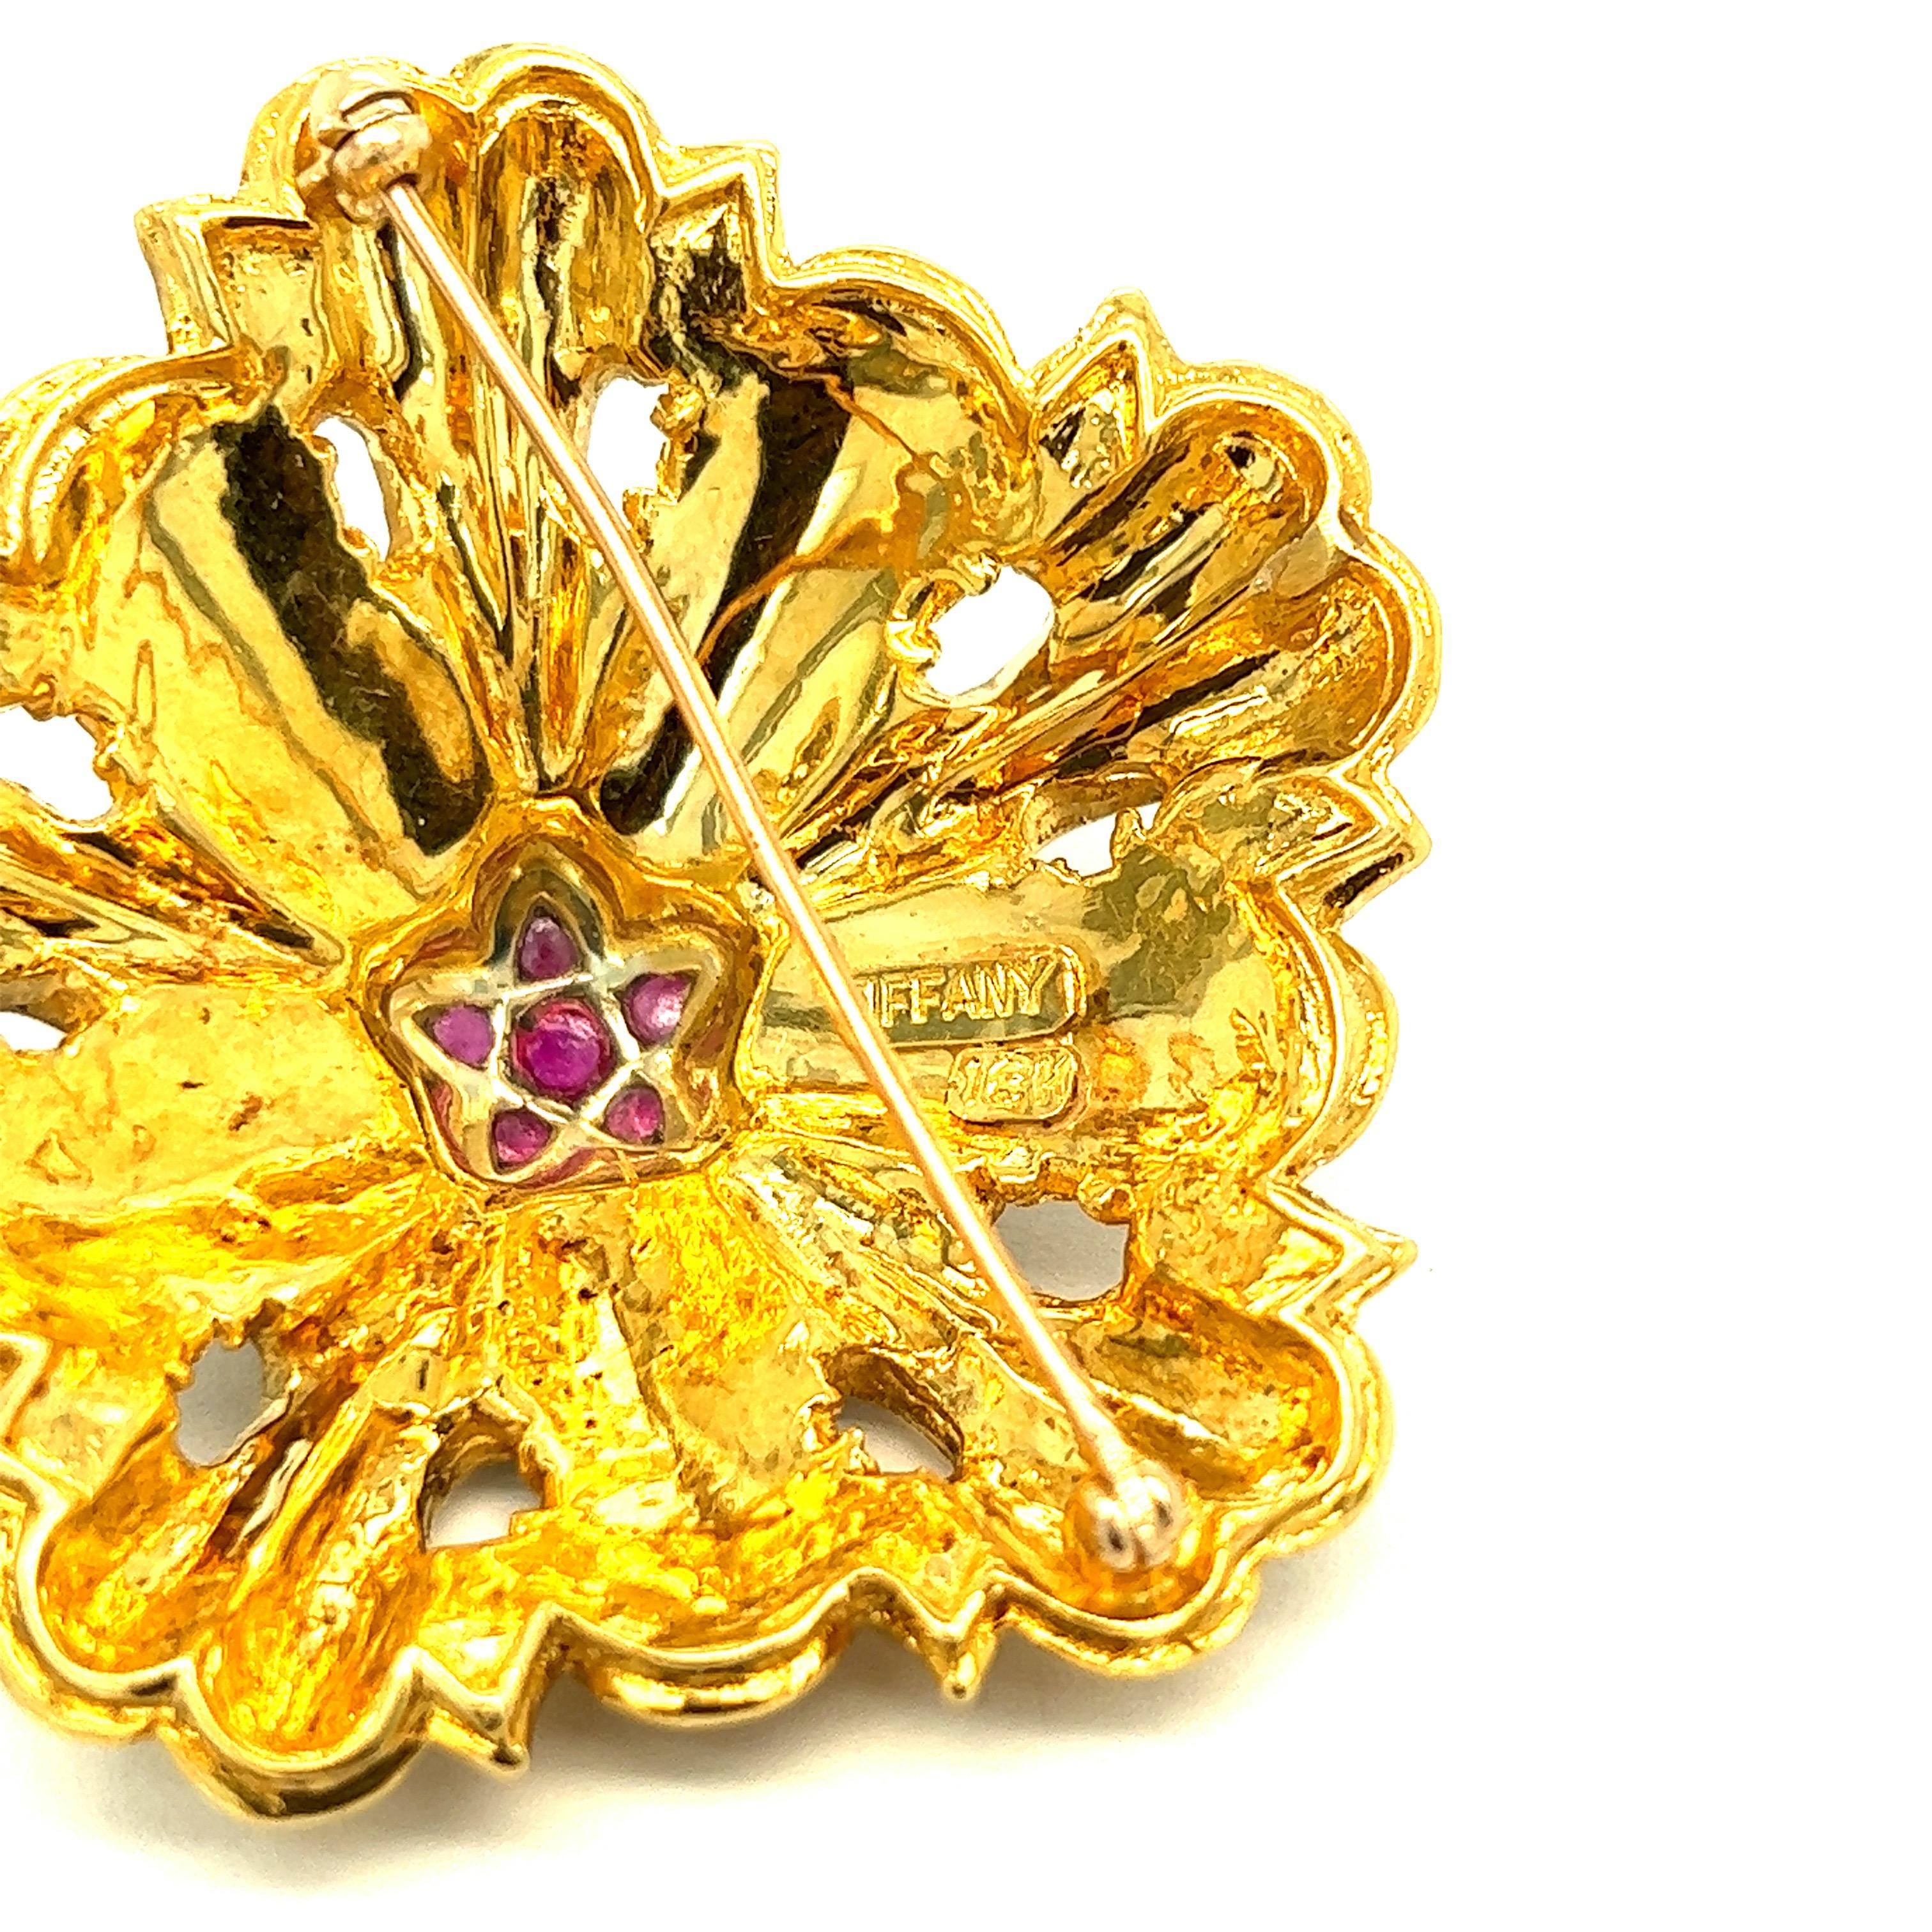 Tiffany & Co. Ruby 18k Gold Brooch For Sale 2